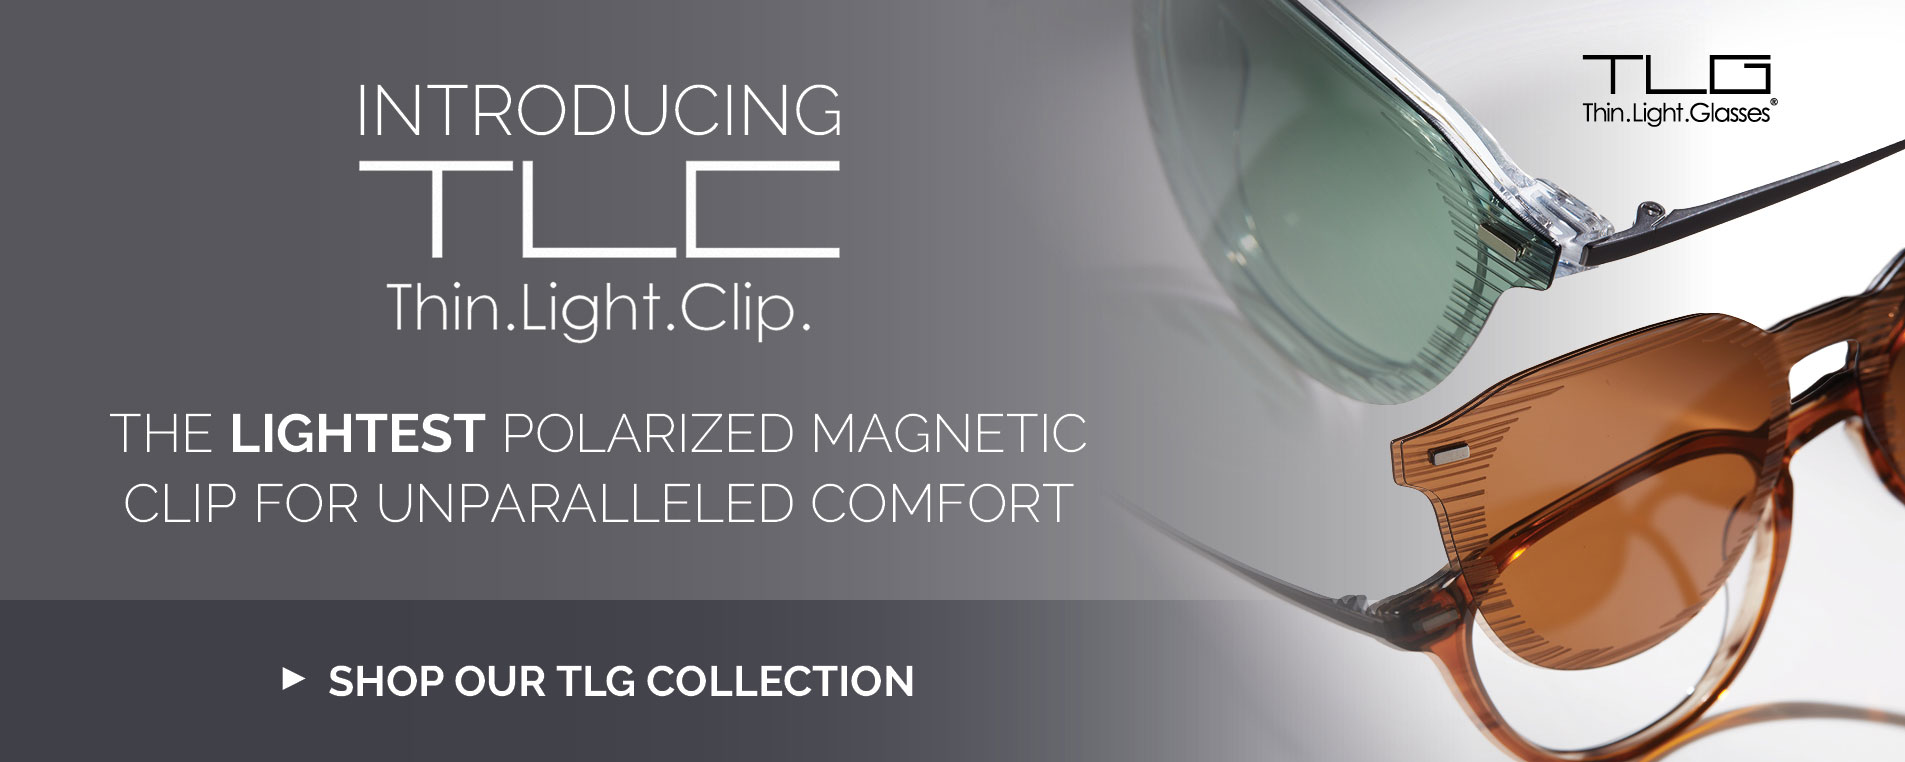 Introducing TLC. Thin. Light. Clip. The lightest polzarized magnetic clip for unparalleled comfort. Shop our TLG collection.